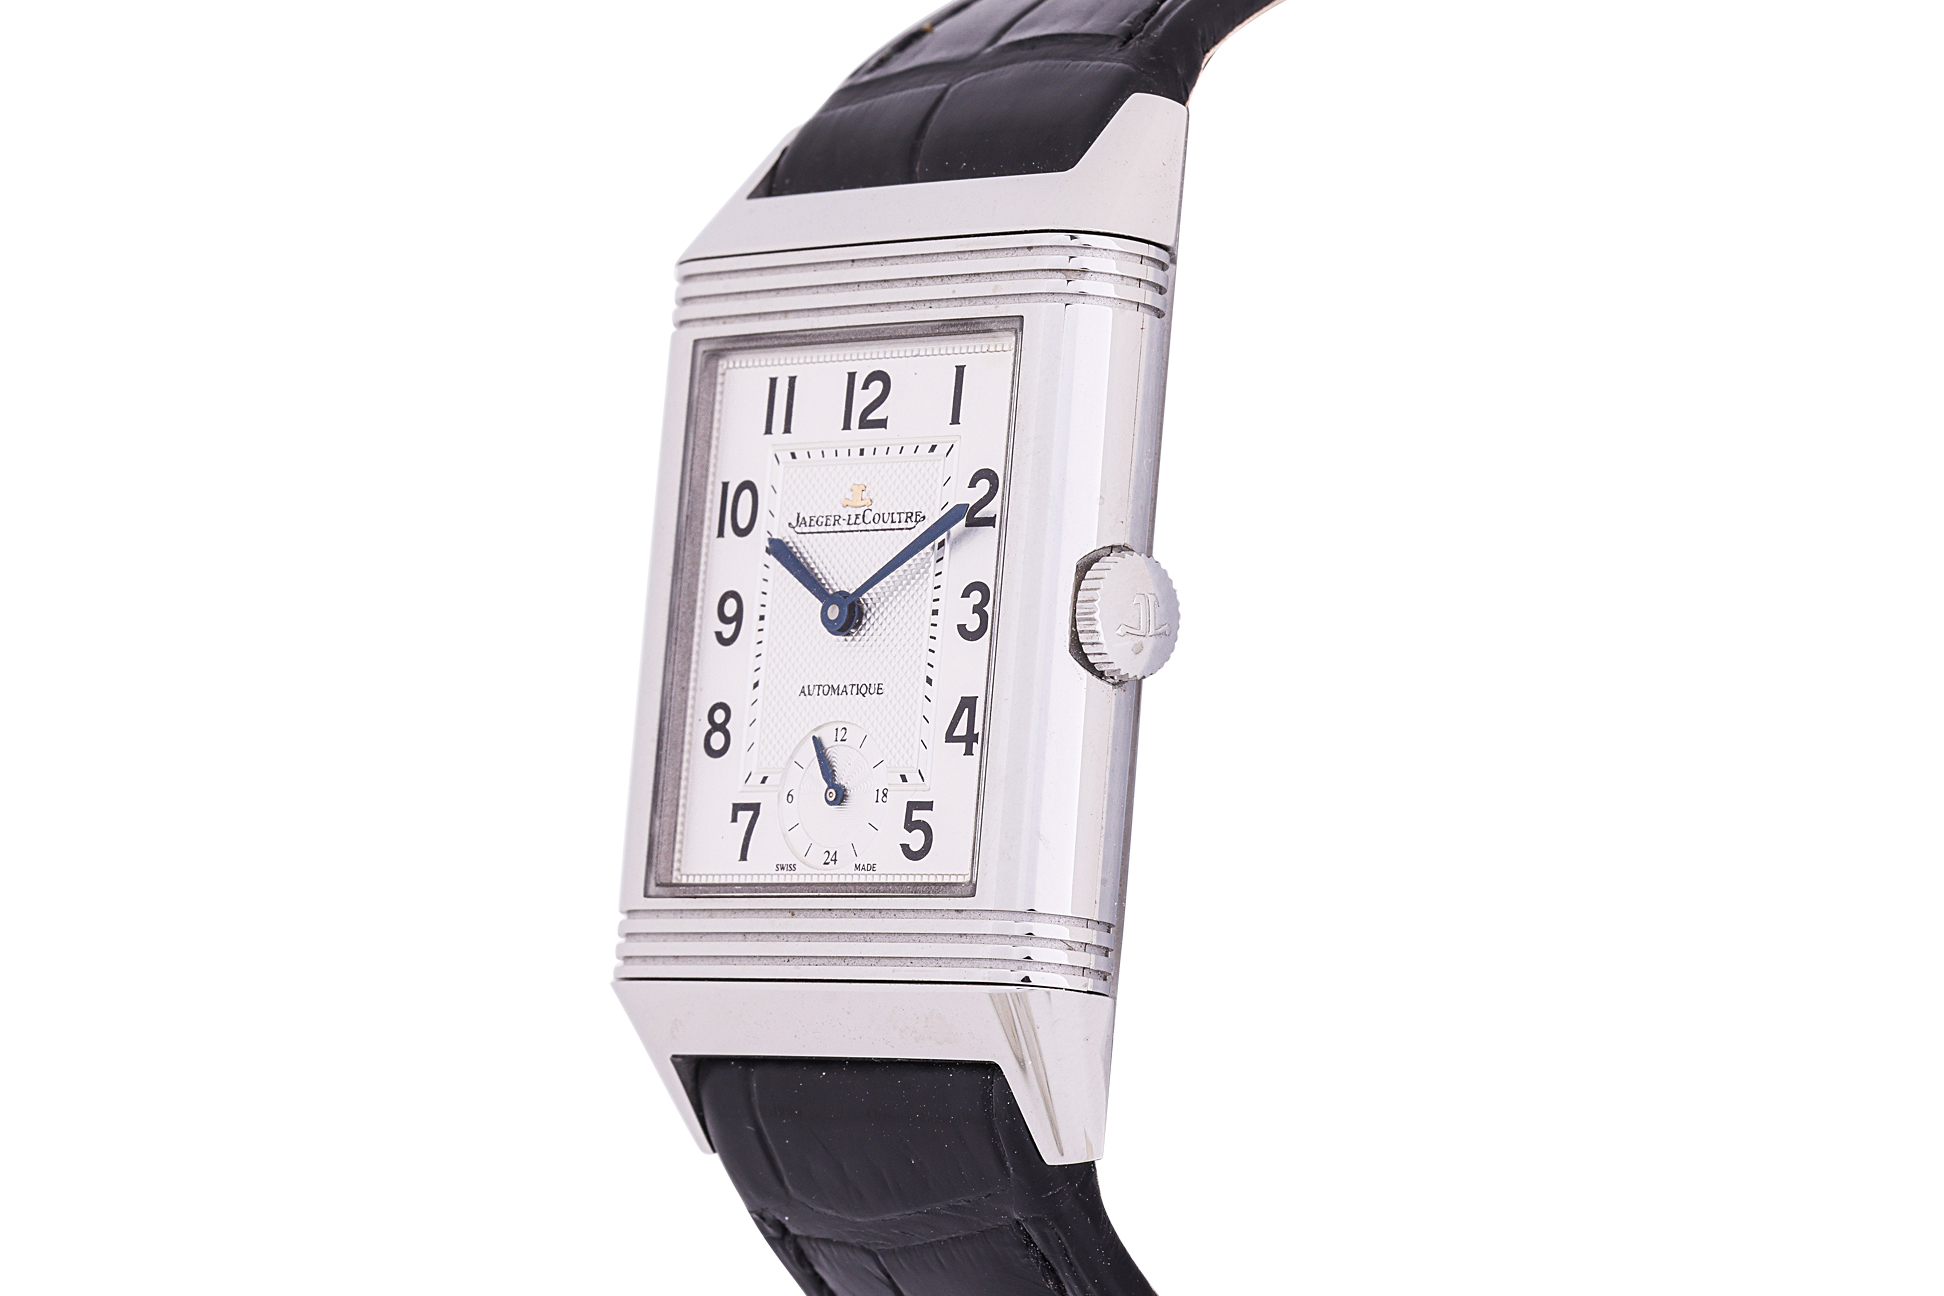 A JAEGER LECOULTRE LIMITED EDITION SG 50 REVERSO WATCH - Image 3 of 8